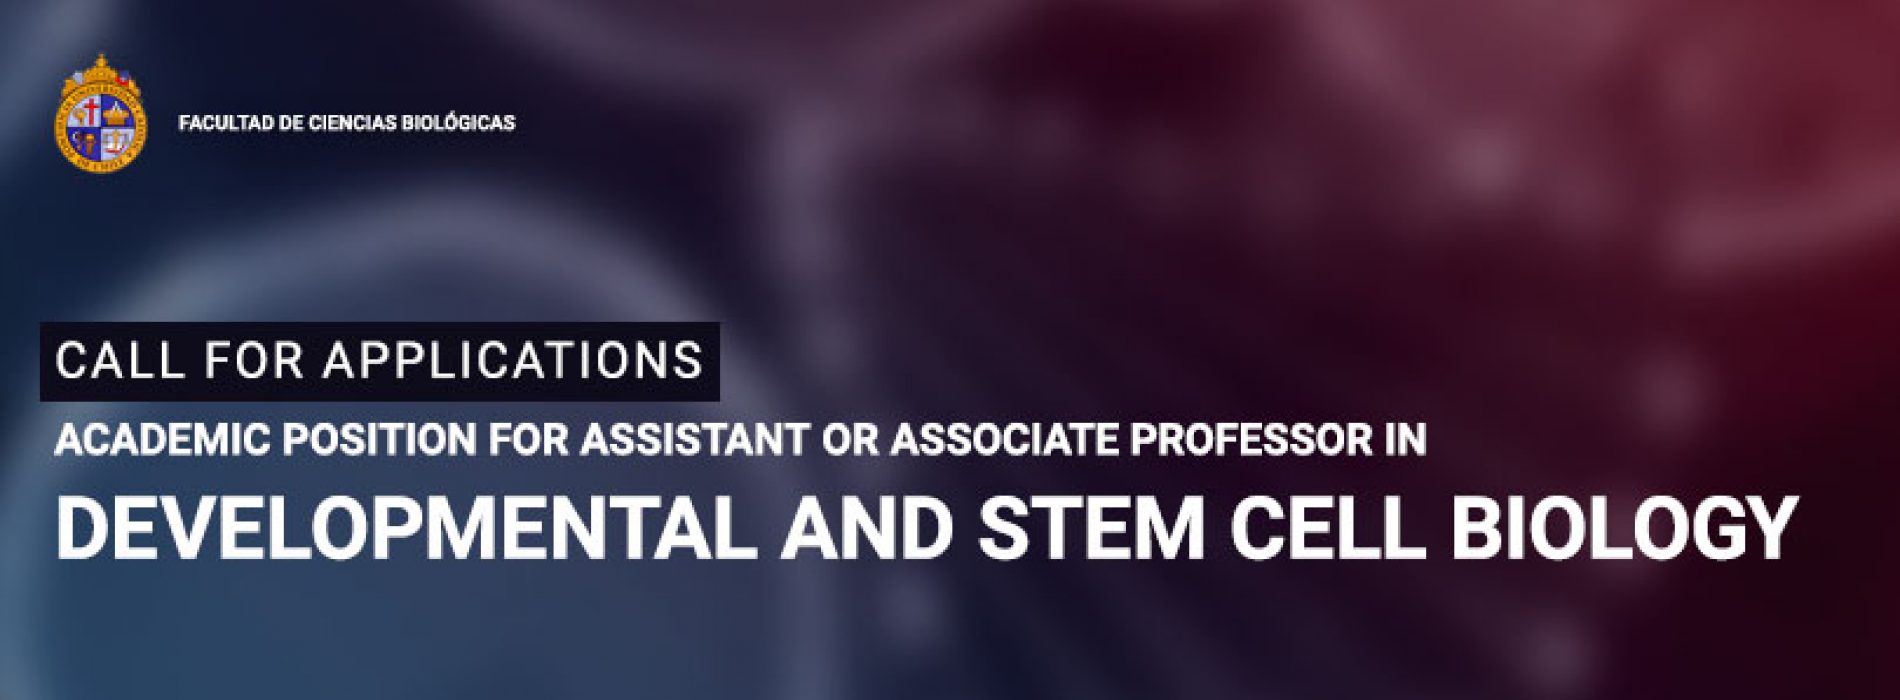 CALL FOR APPLICATIONS: ACADEMIC POSITION FOR ASSISTANT OR ASSOCIATE PROFESSOR IN DEVELOPMENTAL AND STEM CELL BIOLOGY